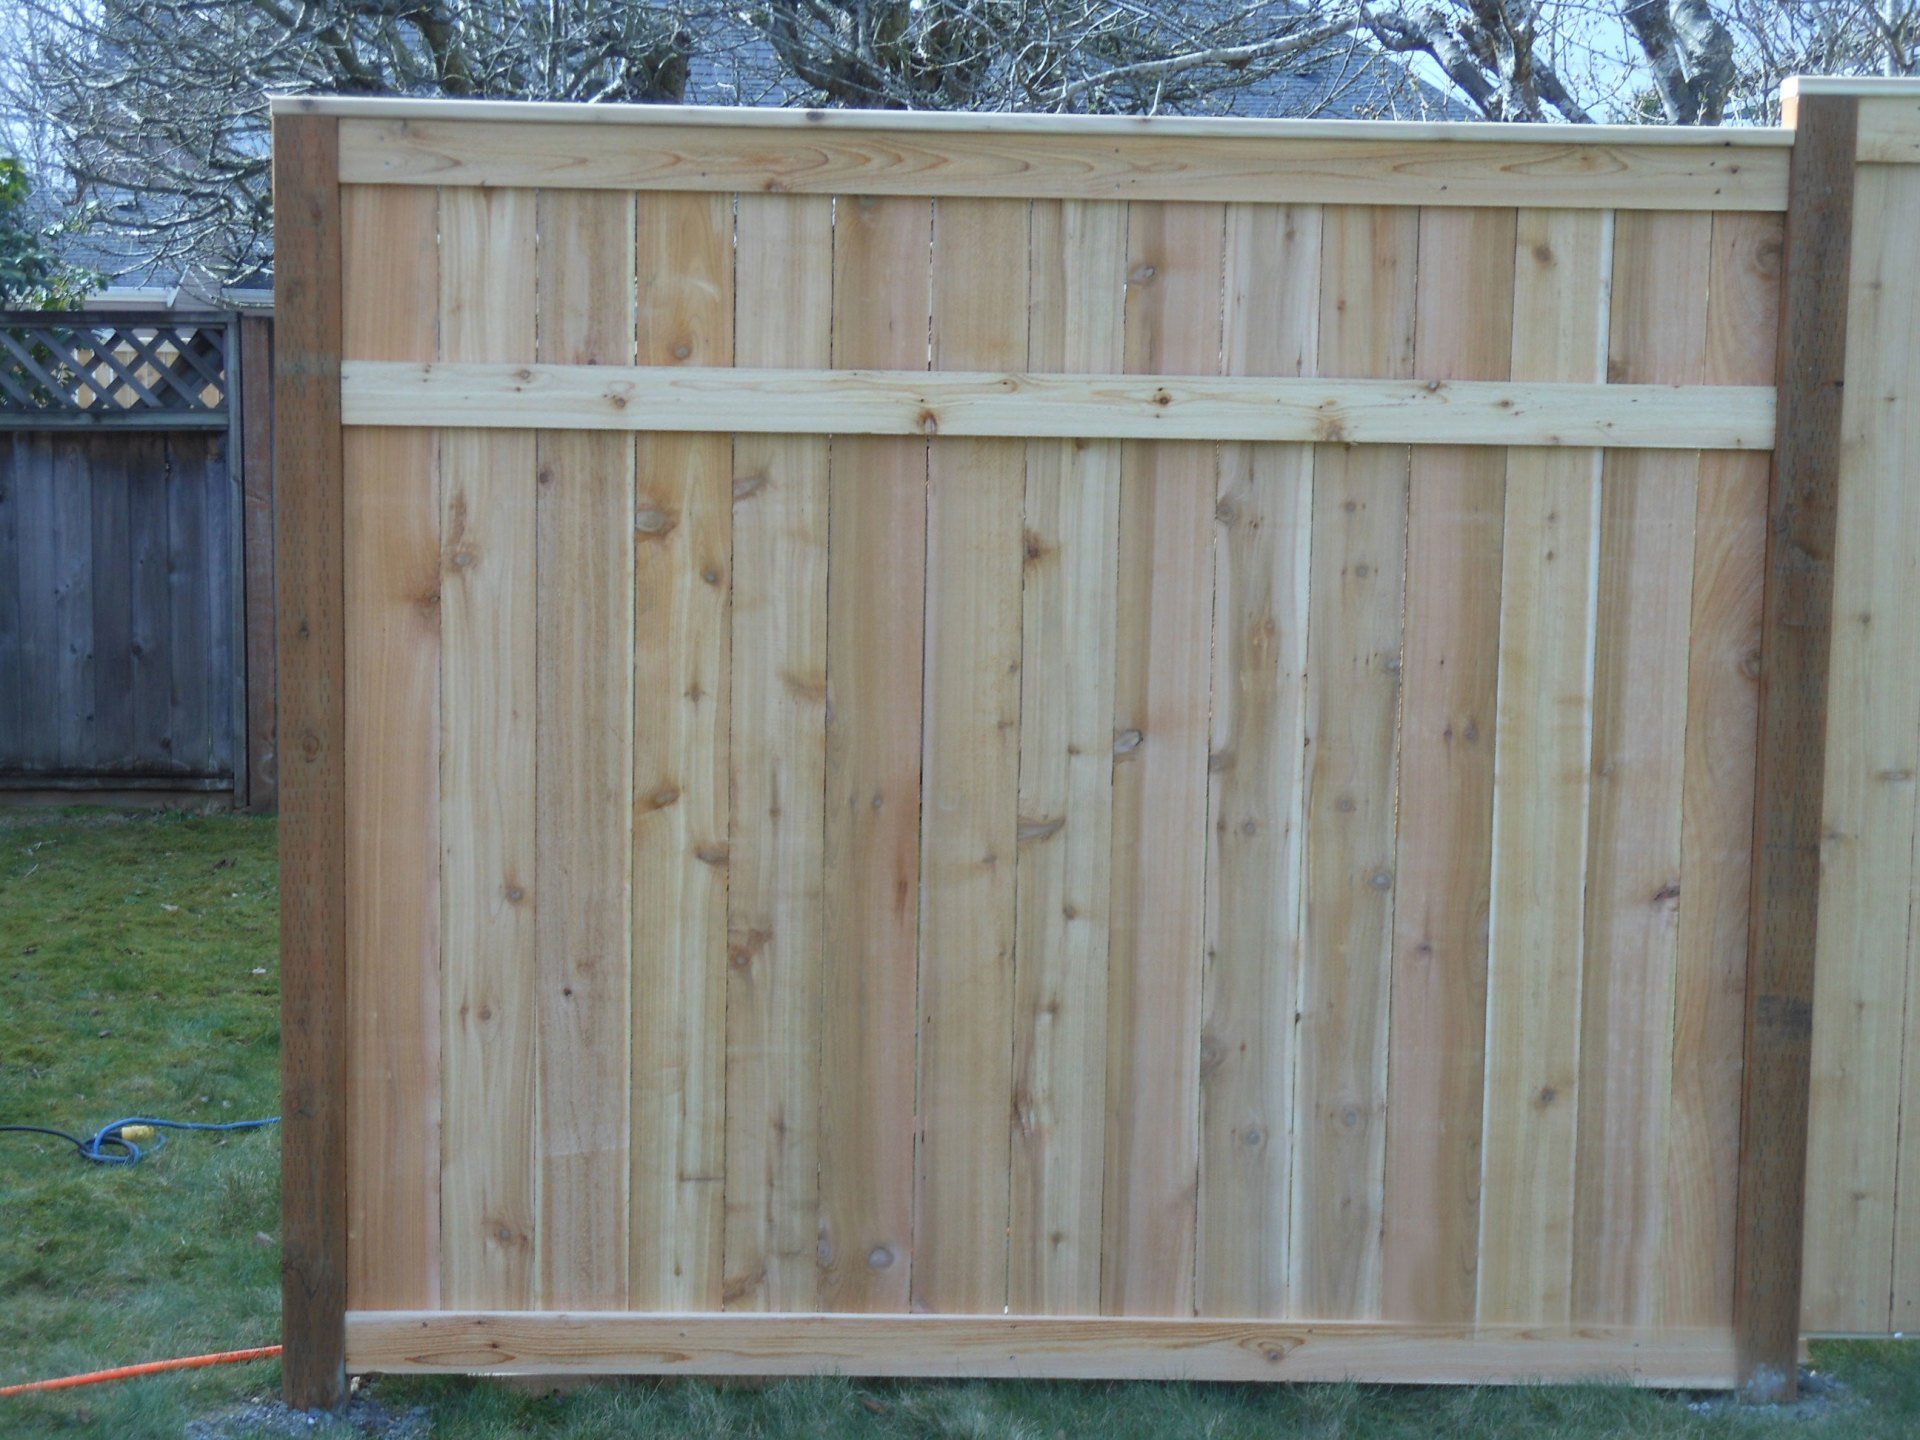 Home fences — Fence contractors in Fermdale, WA